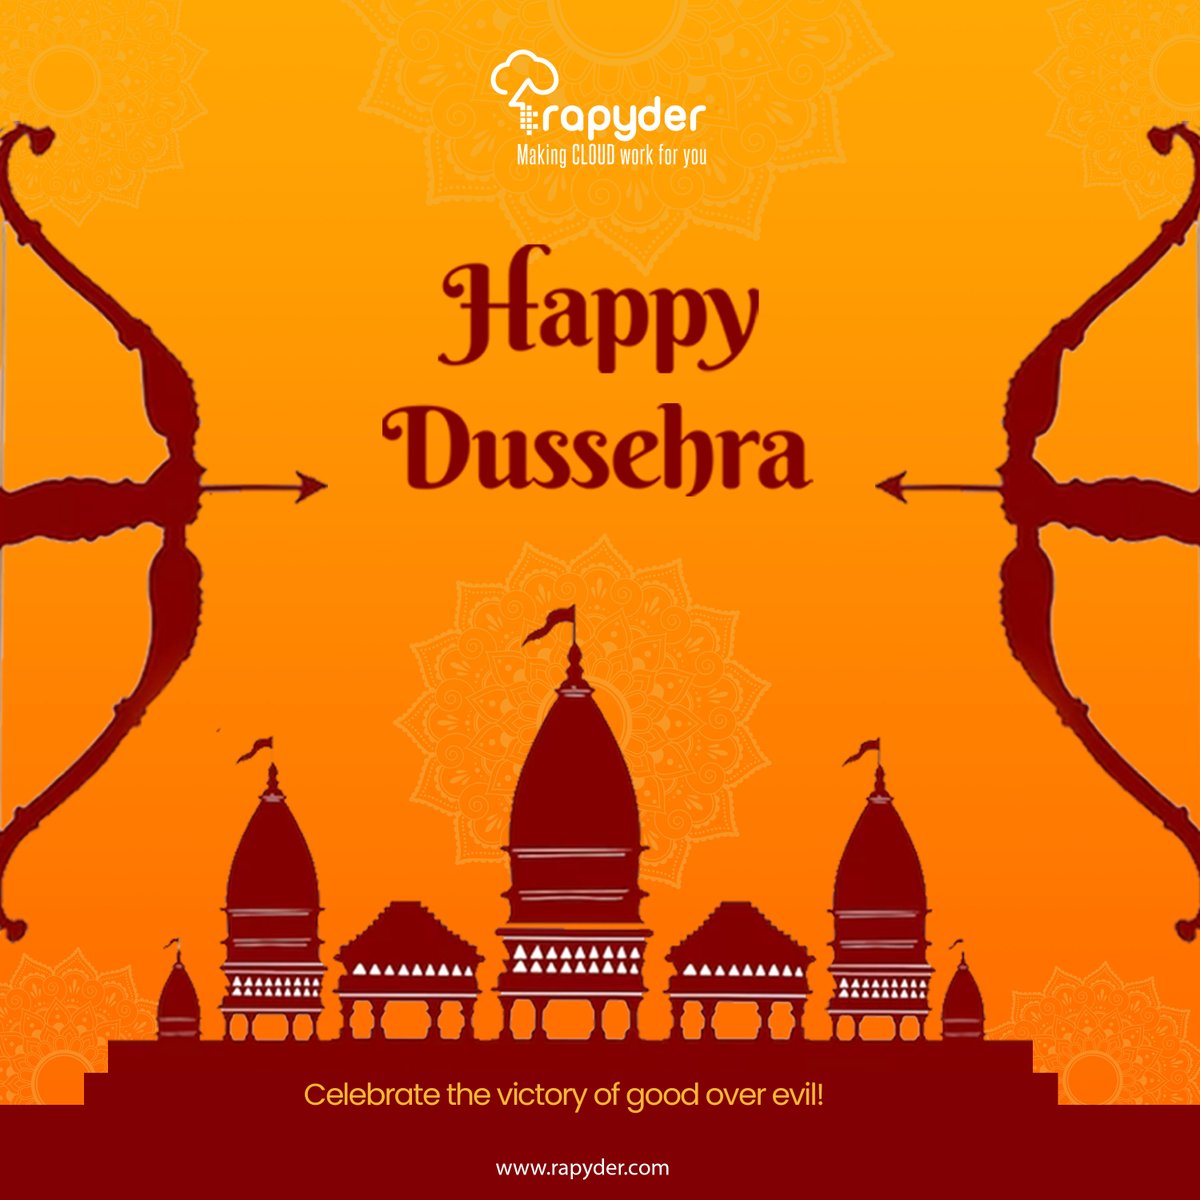 24 October: Dusshera May the truth perpetually prevail and goodness conquer the evil. May the Lord grant you wisdom and good health. #dusshera #HappyDussehra #rapyder #wisdom